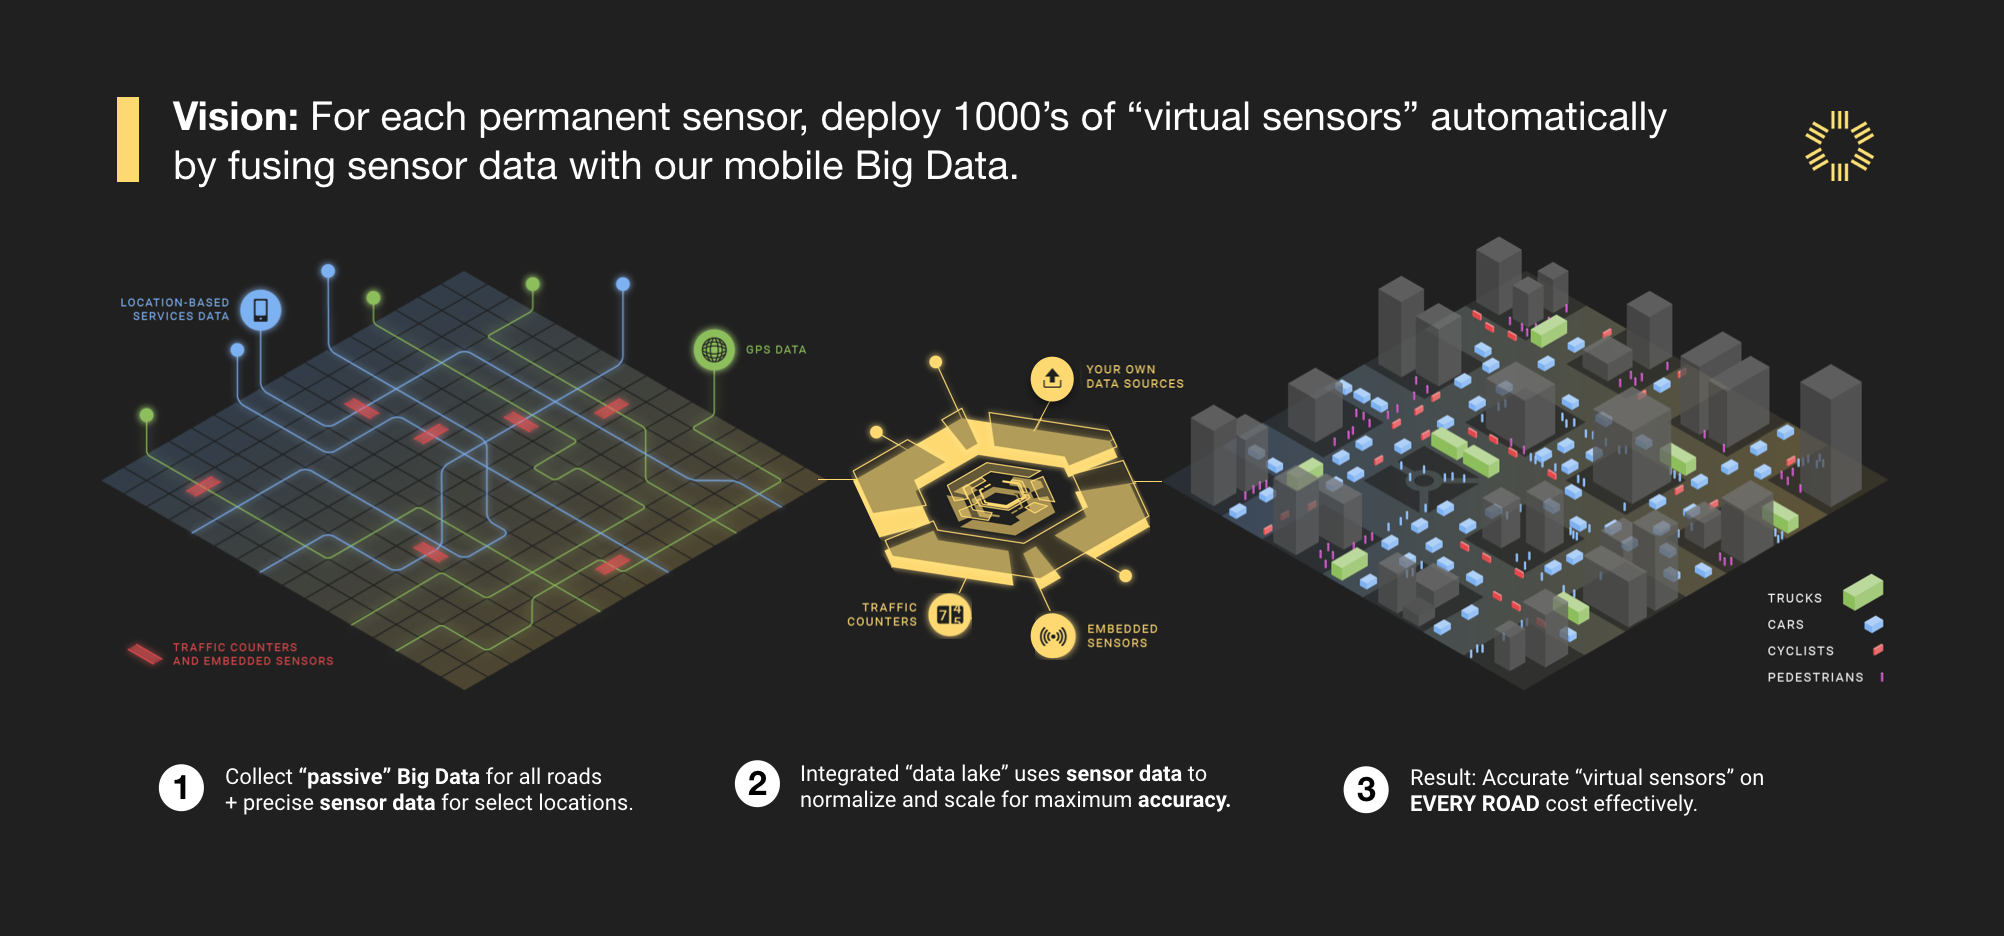 How it works: Fusing IoT sensor data with our mobile Big Data